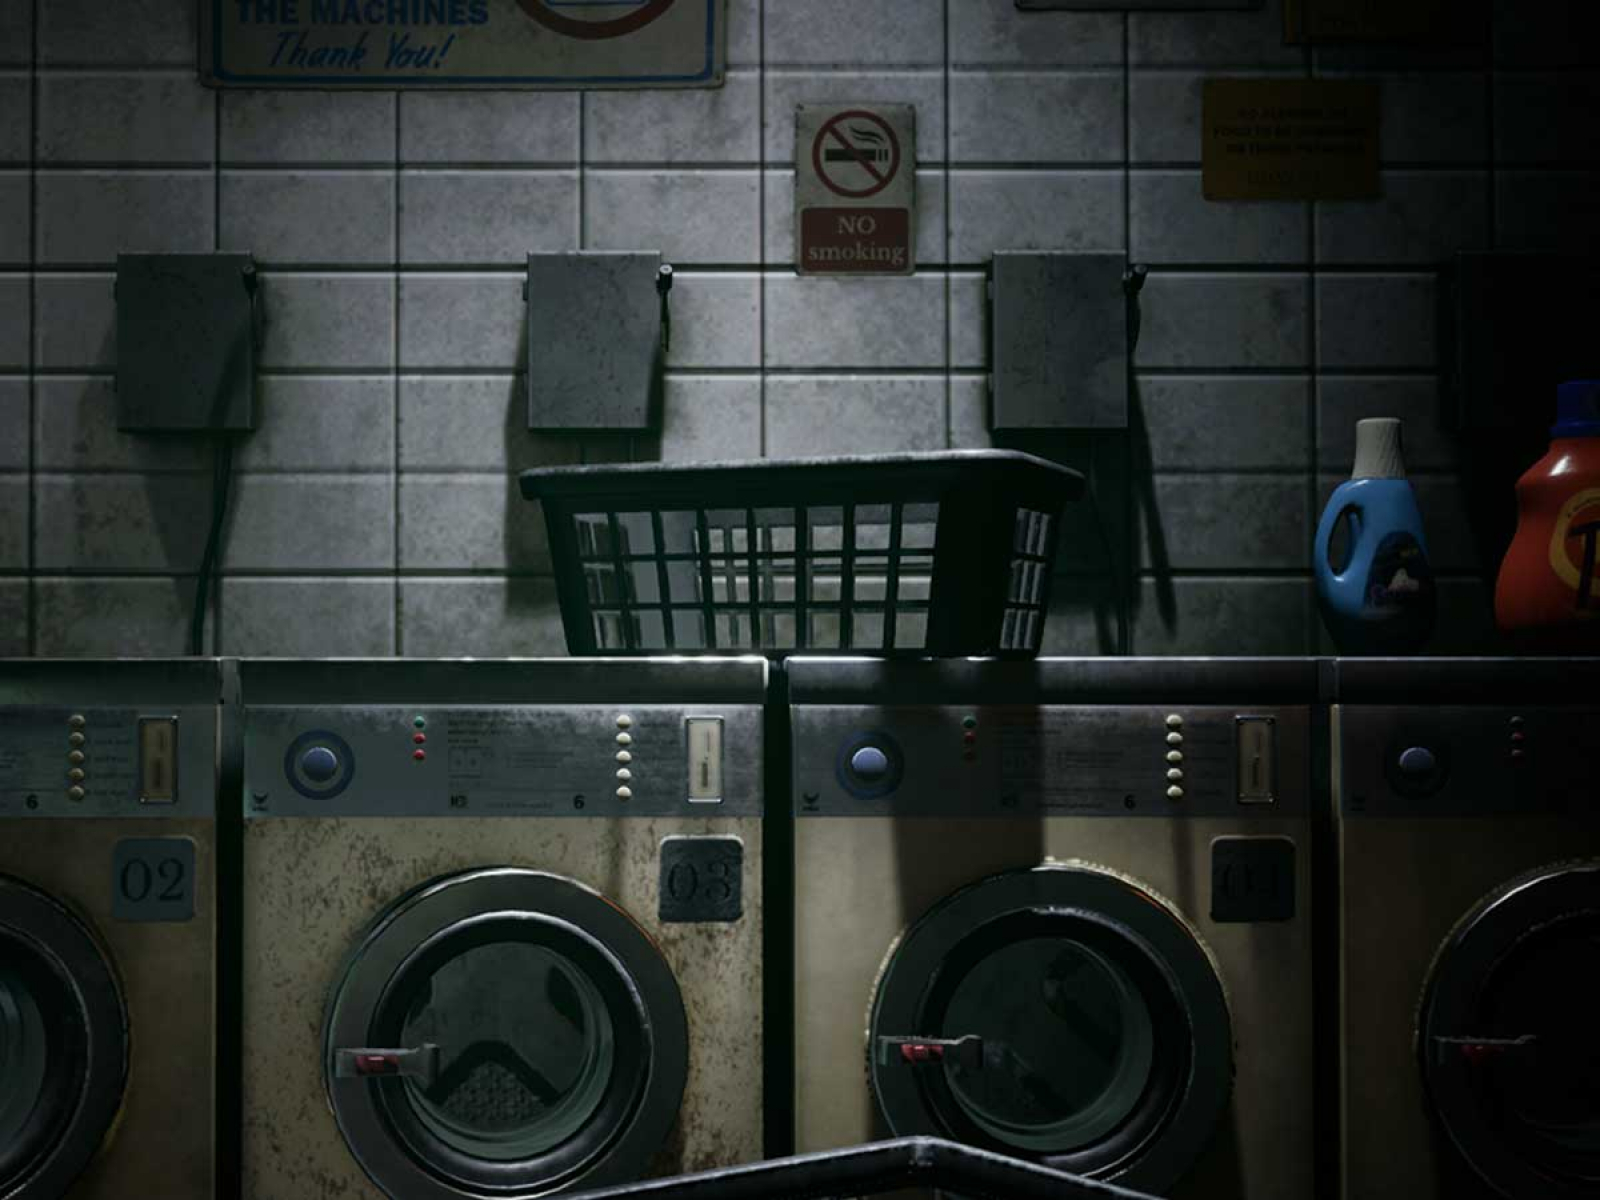 A dark laundromat with empty baskets and laundry cleaning supplies.